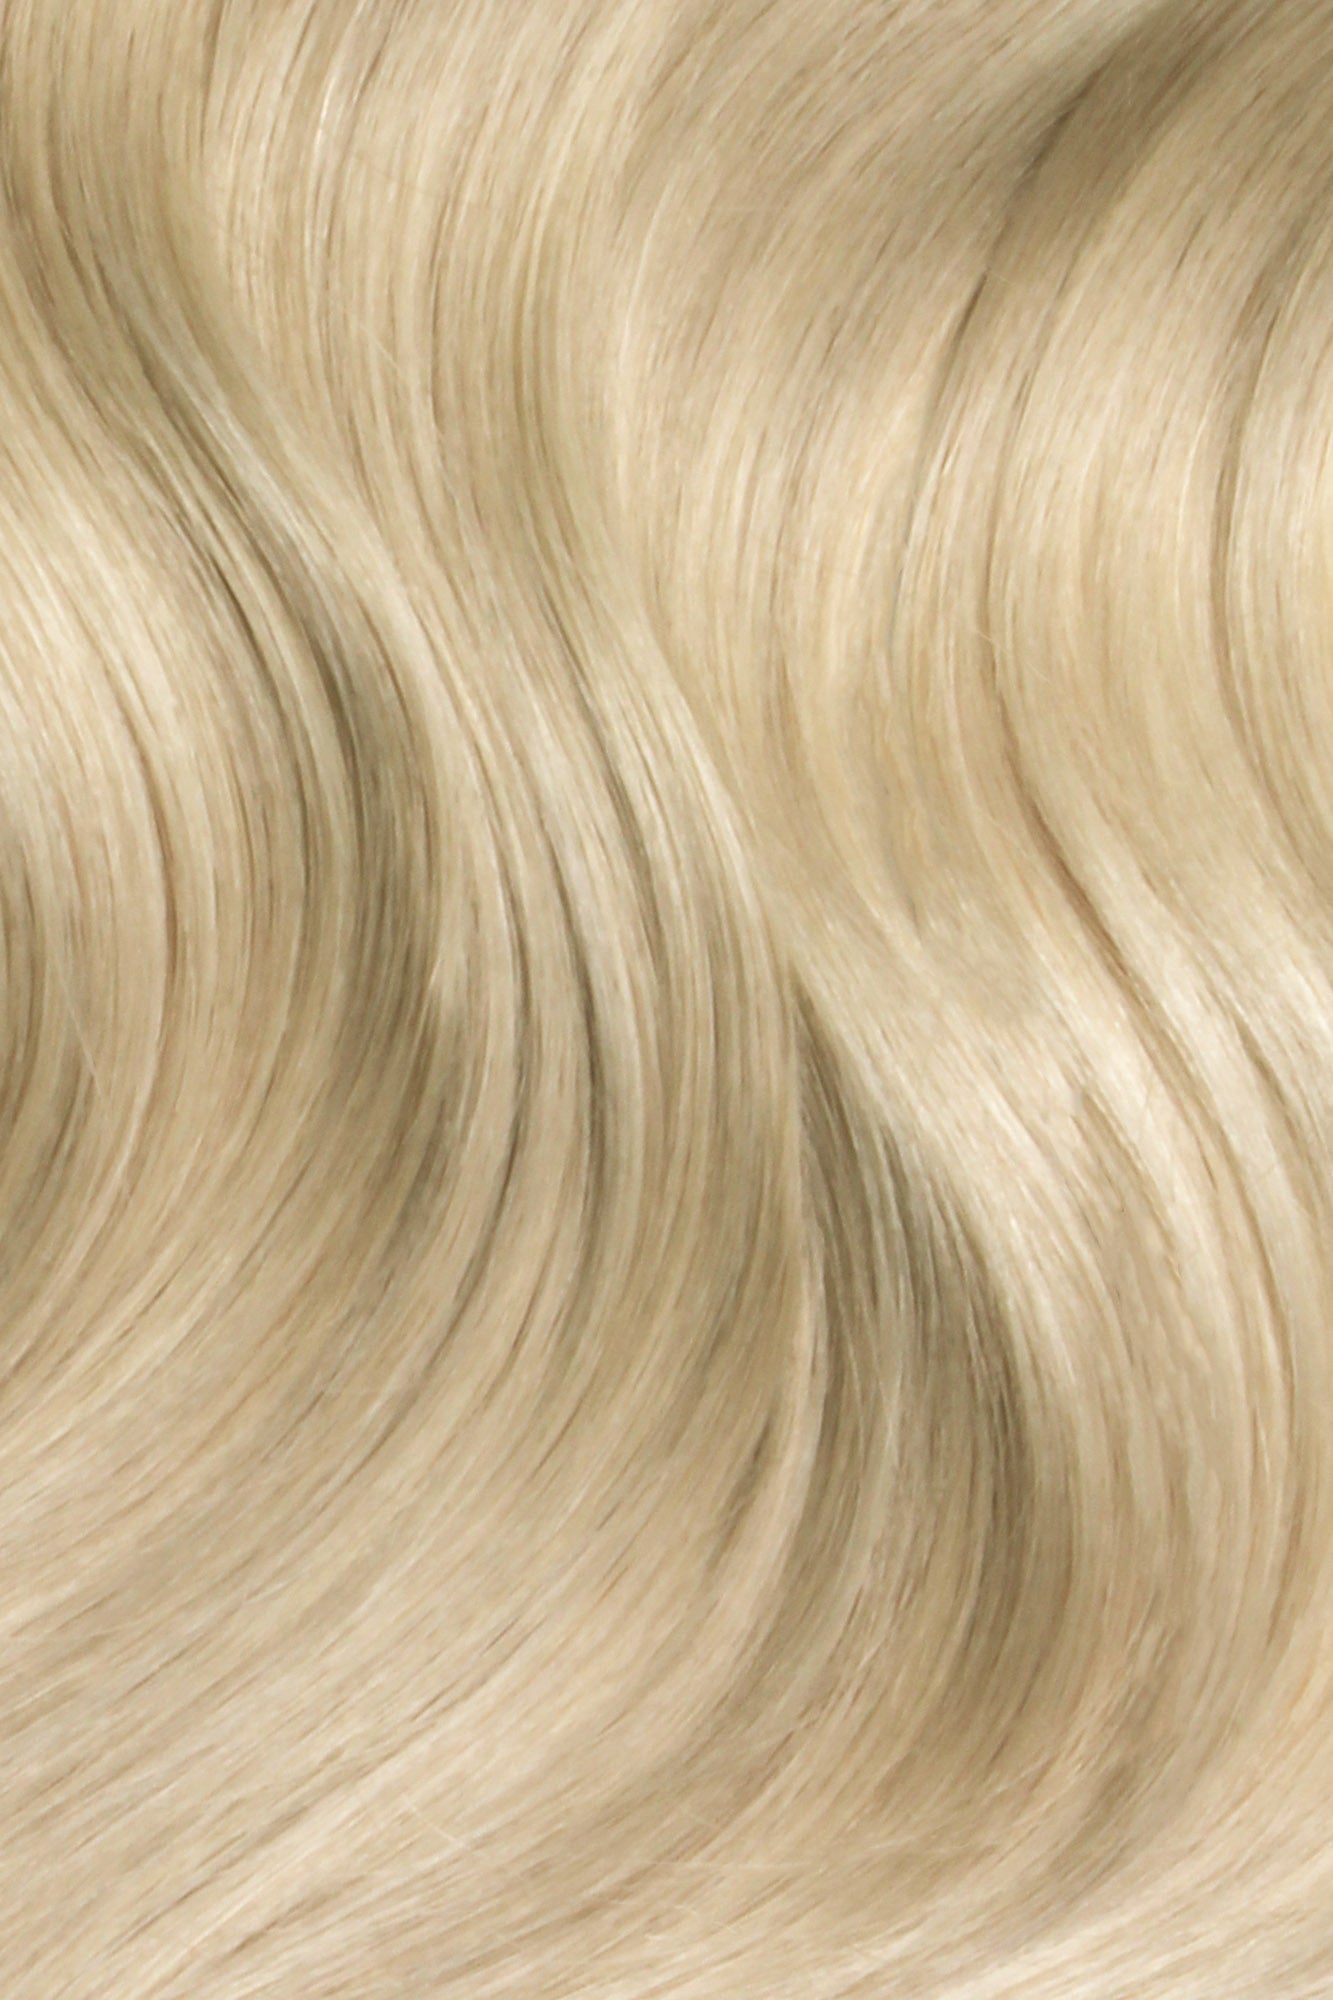 SEAMLESS® Flat Weft 18 Inches - SWAY Hair Extensions Hollywood-Ash-Blonde-18A-613A Natural SEAMLESS® Flat Weft 18 Inches extensions. Thin, flexible, and discreet. 100% Double Drawn Remy Human Hair. Versatile and reusable